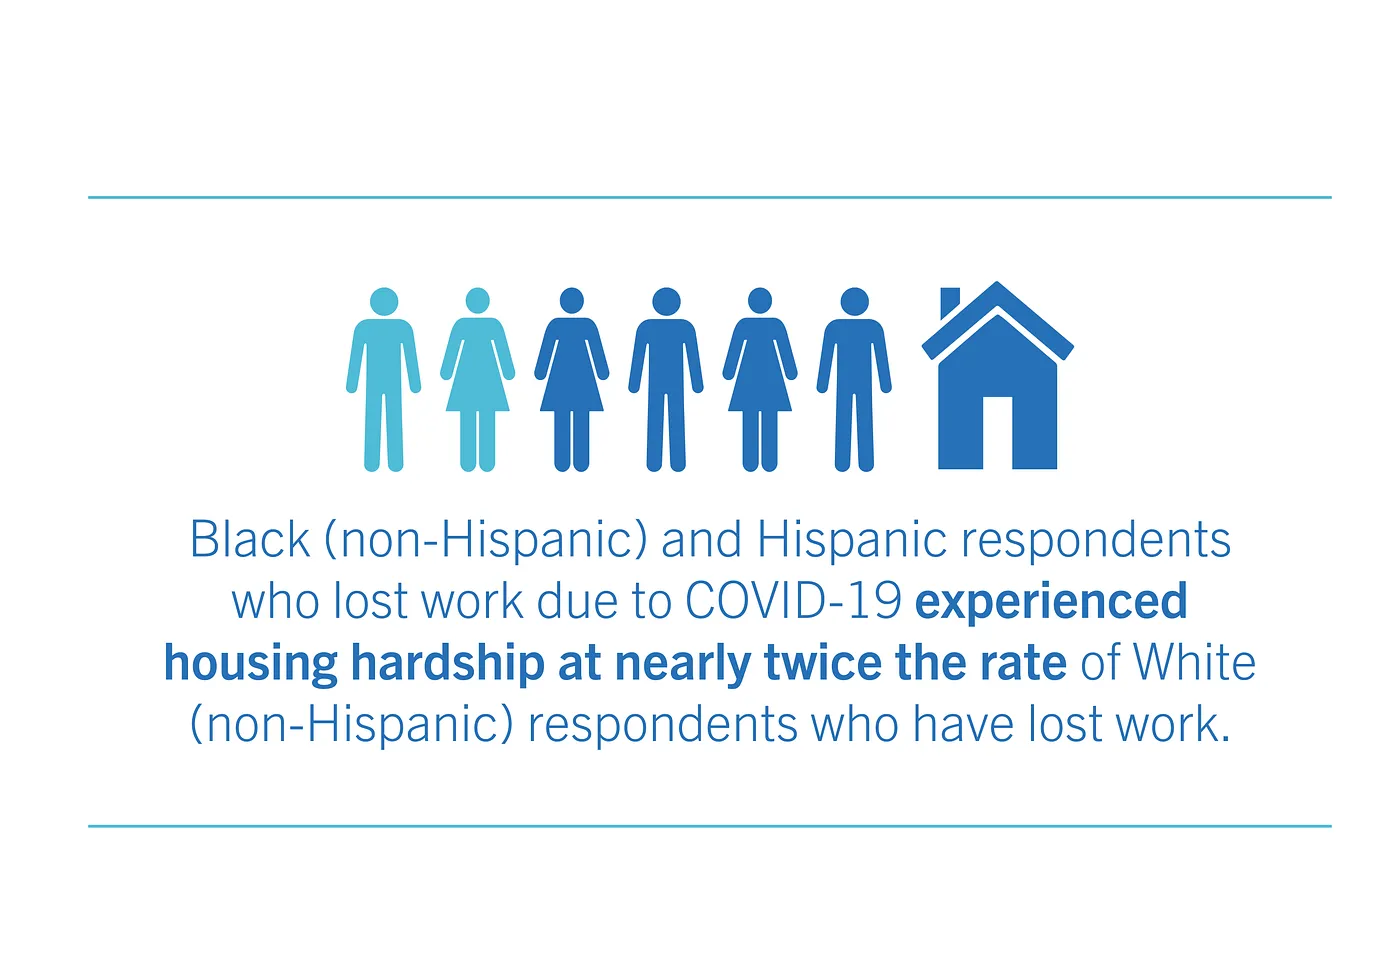 Black (non-Hispanic) and Hispanic respondents who lost work due to COVID-19 experienced housing hardship at nearly twice the rate of White (non-Hispanic) respondents who have lost work.